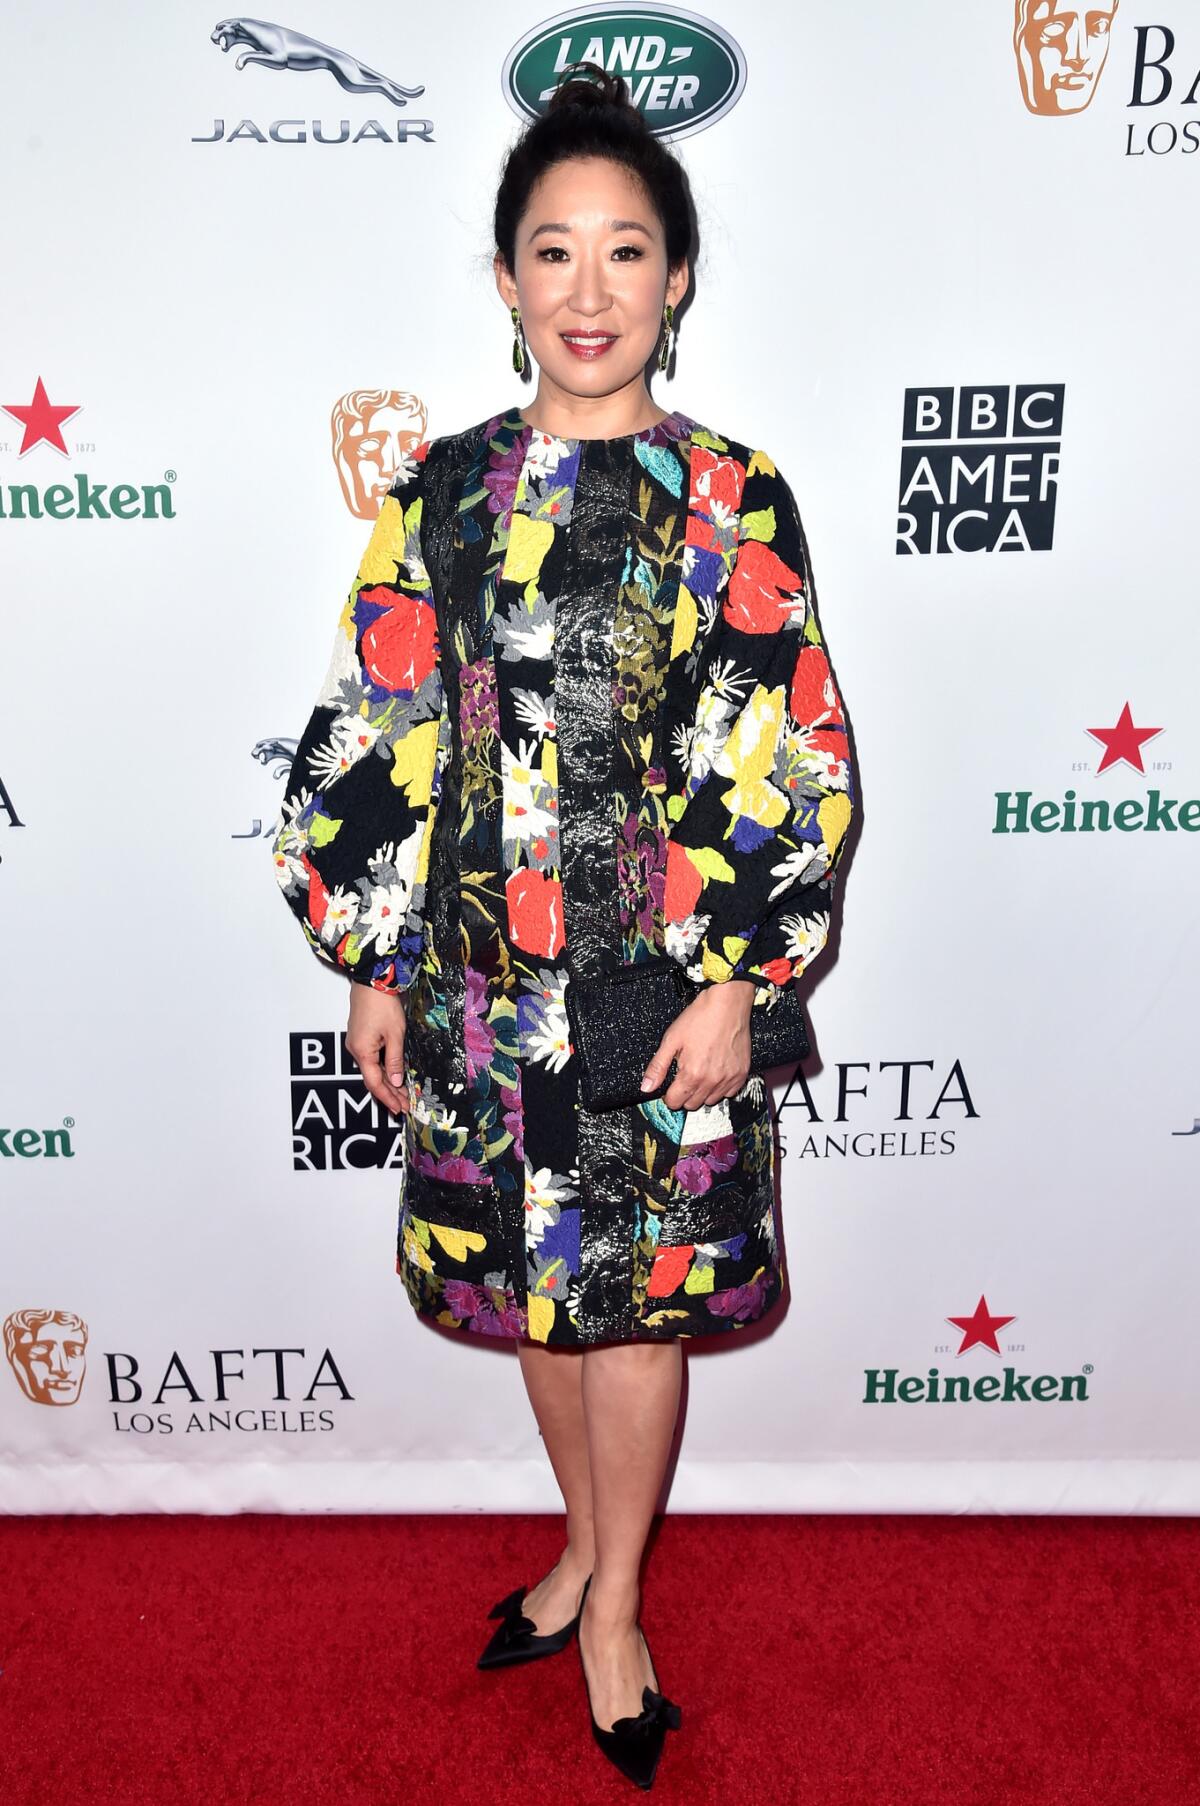 Emmy nominee Sandra Oh arrives for the American TV Tea Party hosted by BAFTA Los Angeles and BBC America in Beverly Hills.